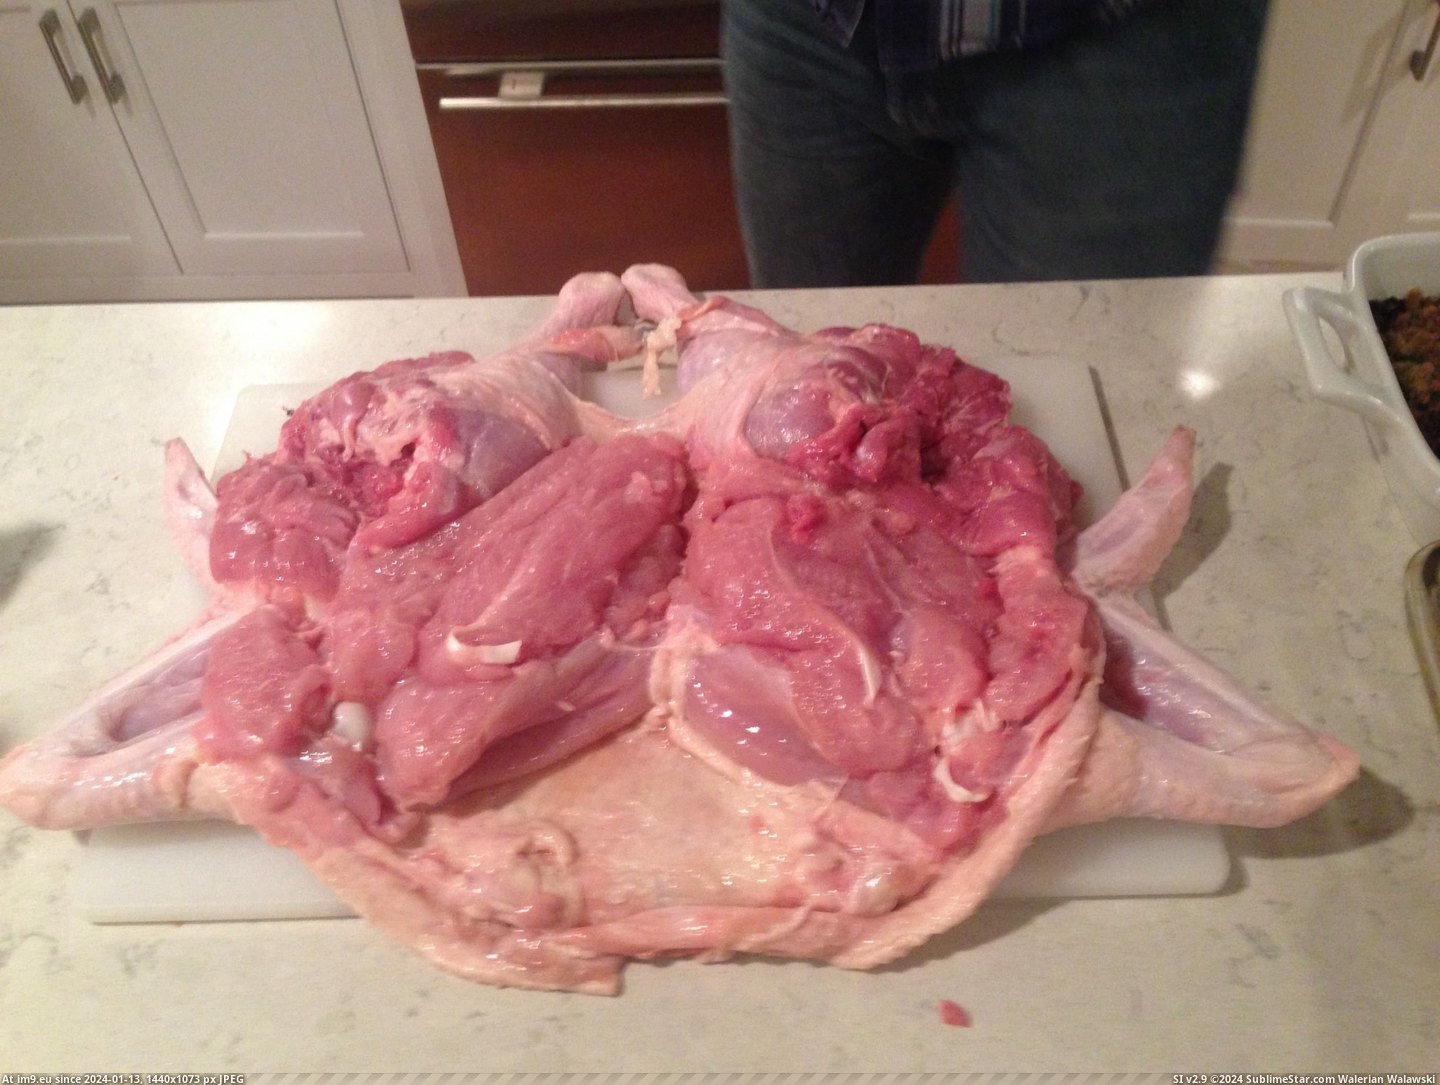 #For #Year #Thought #Thanksgiving #Duck #Turkey #Turducken #Family #See #Chicken [Pics] My family makes turducken (a chicken in a duck in a turkey) every year for Thanksgiving. Thought reddit would like to see Pic. (Obraz z album My r/PICS favs))